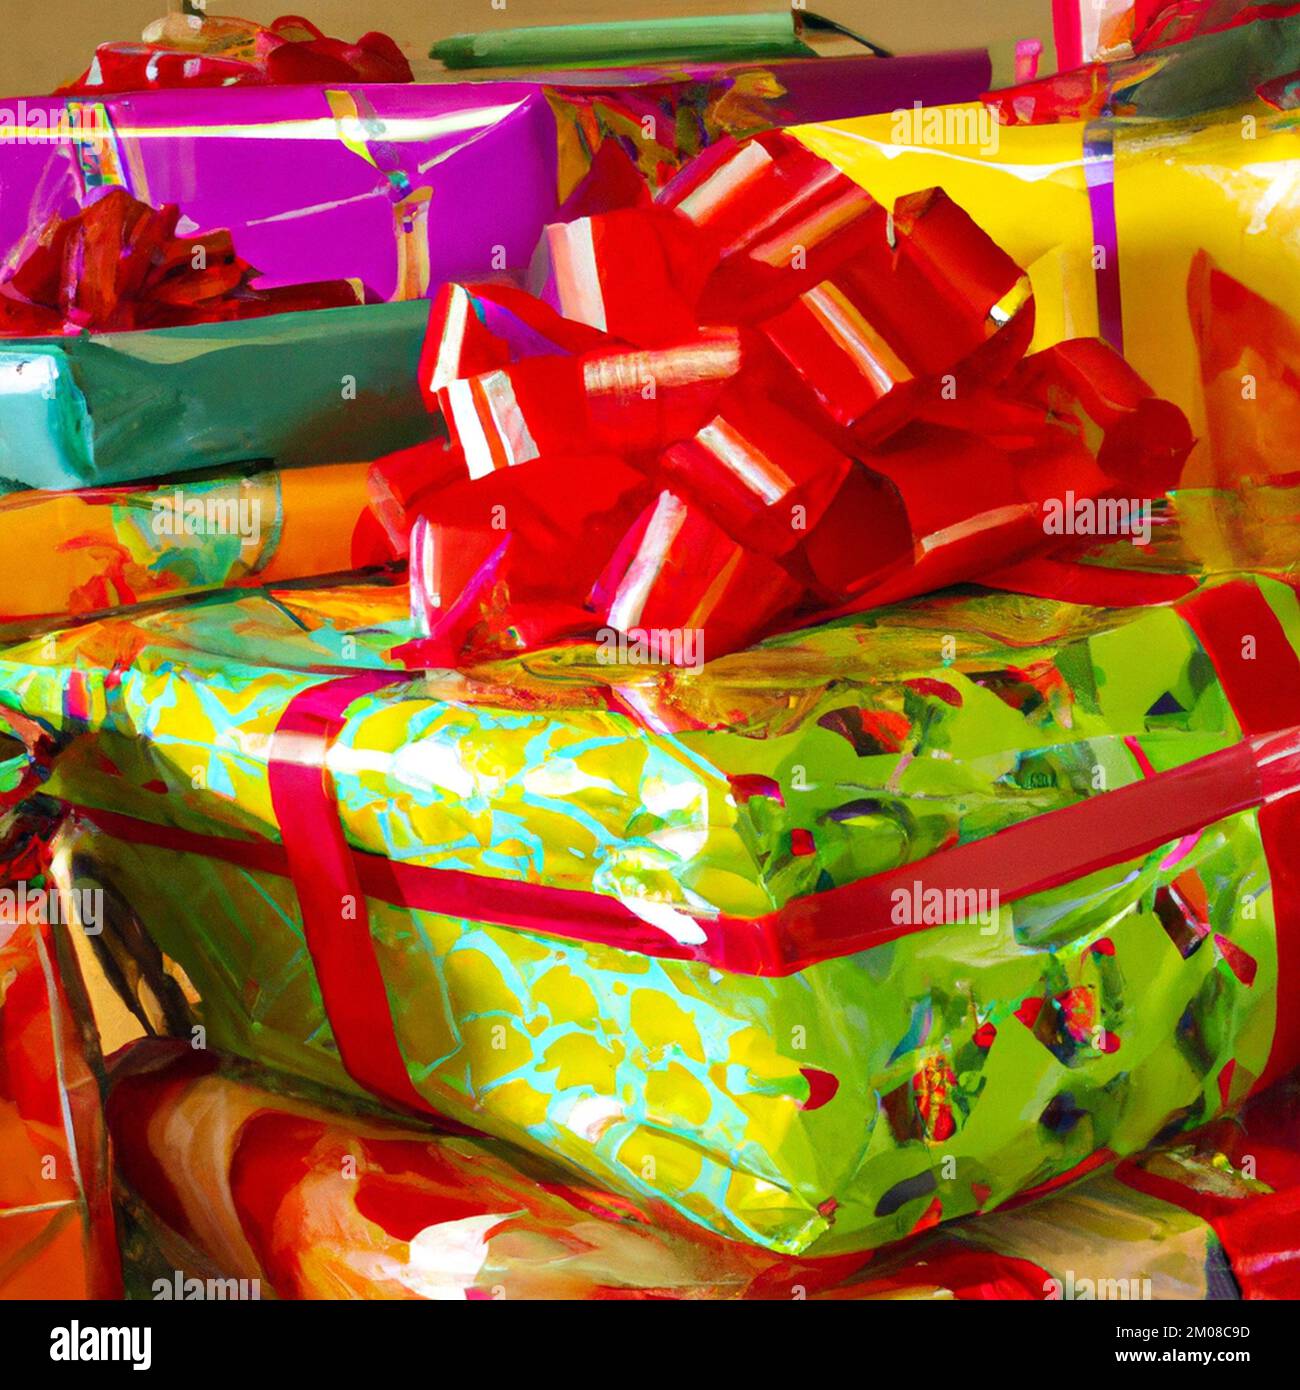 Square background, colorful holiday gift boxes with ribbons and bows. Stock Photo